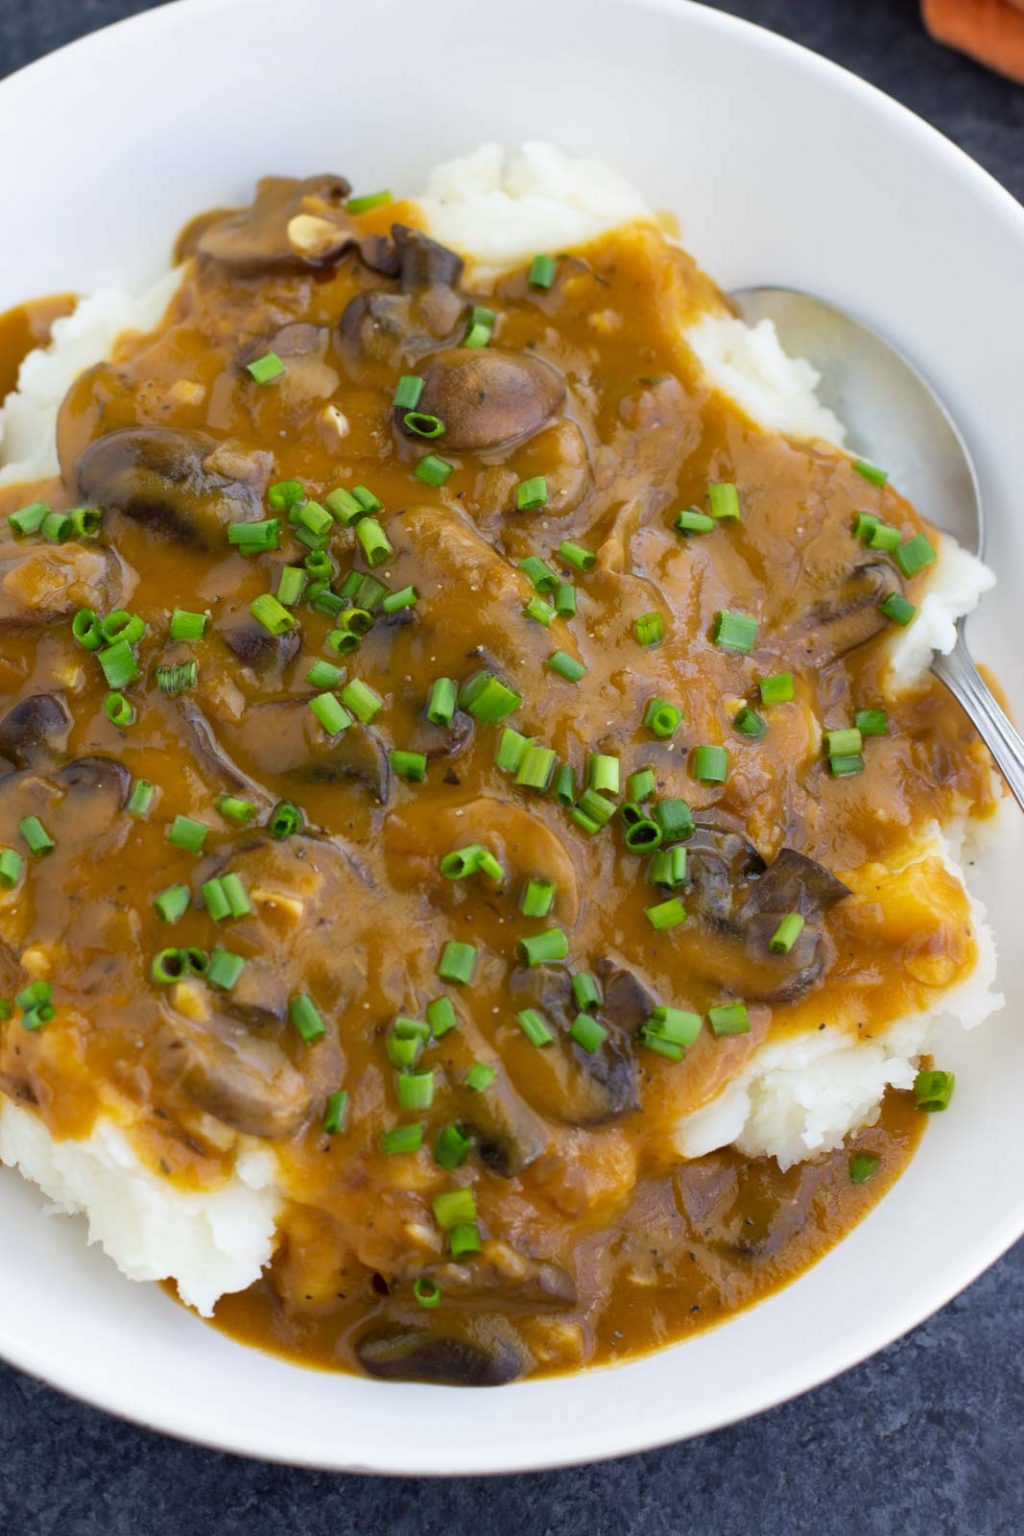 A white bowl filled with mashed potatoes, mushroom gravy, and chives.